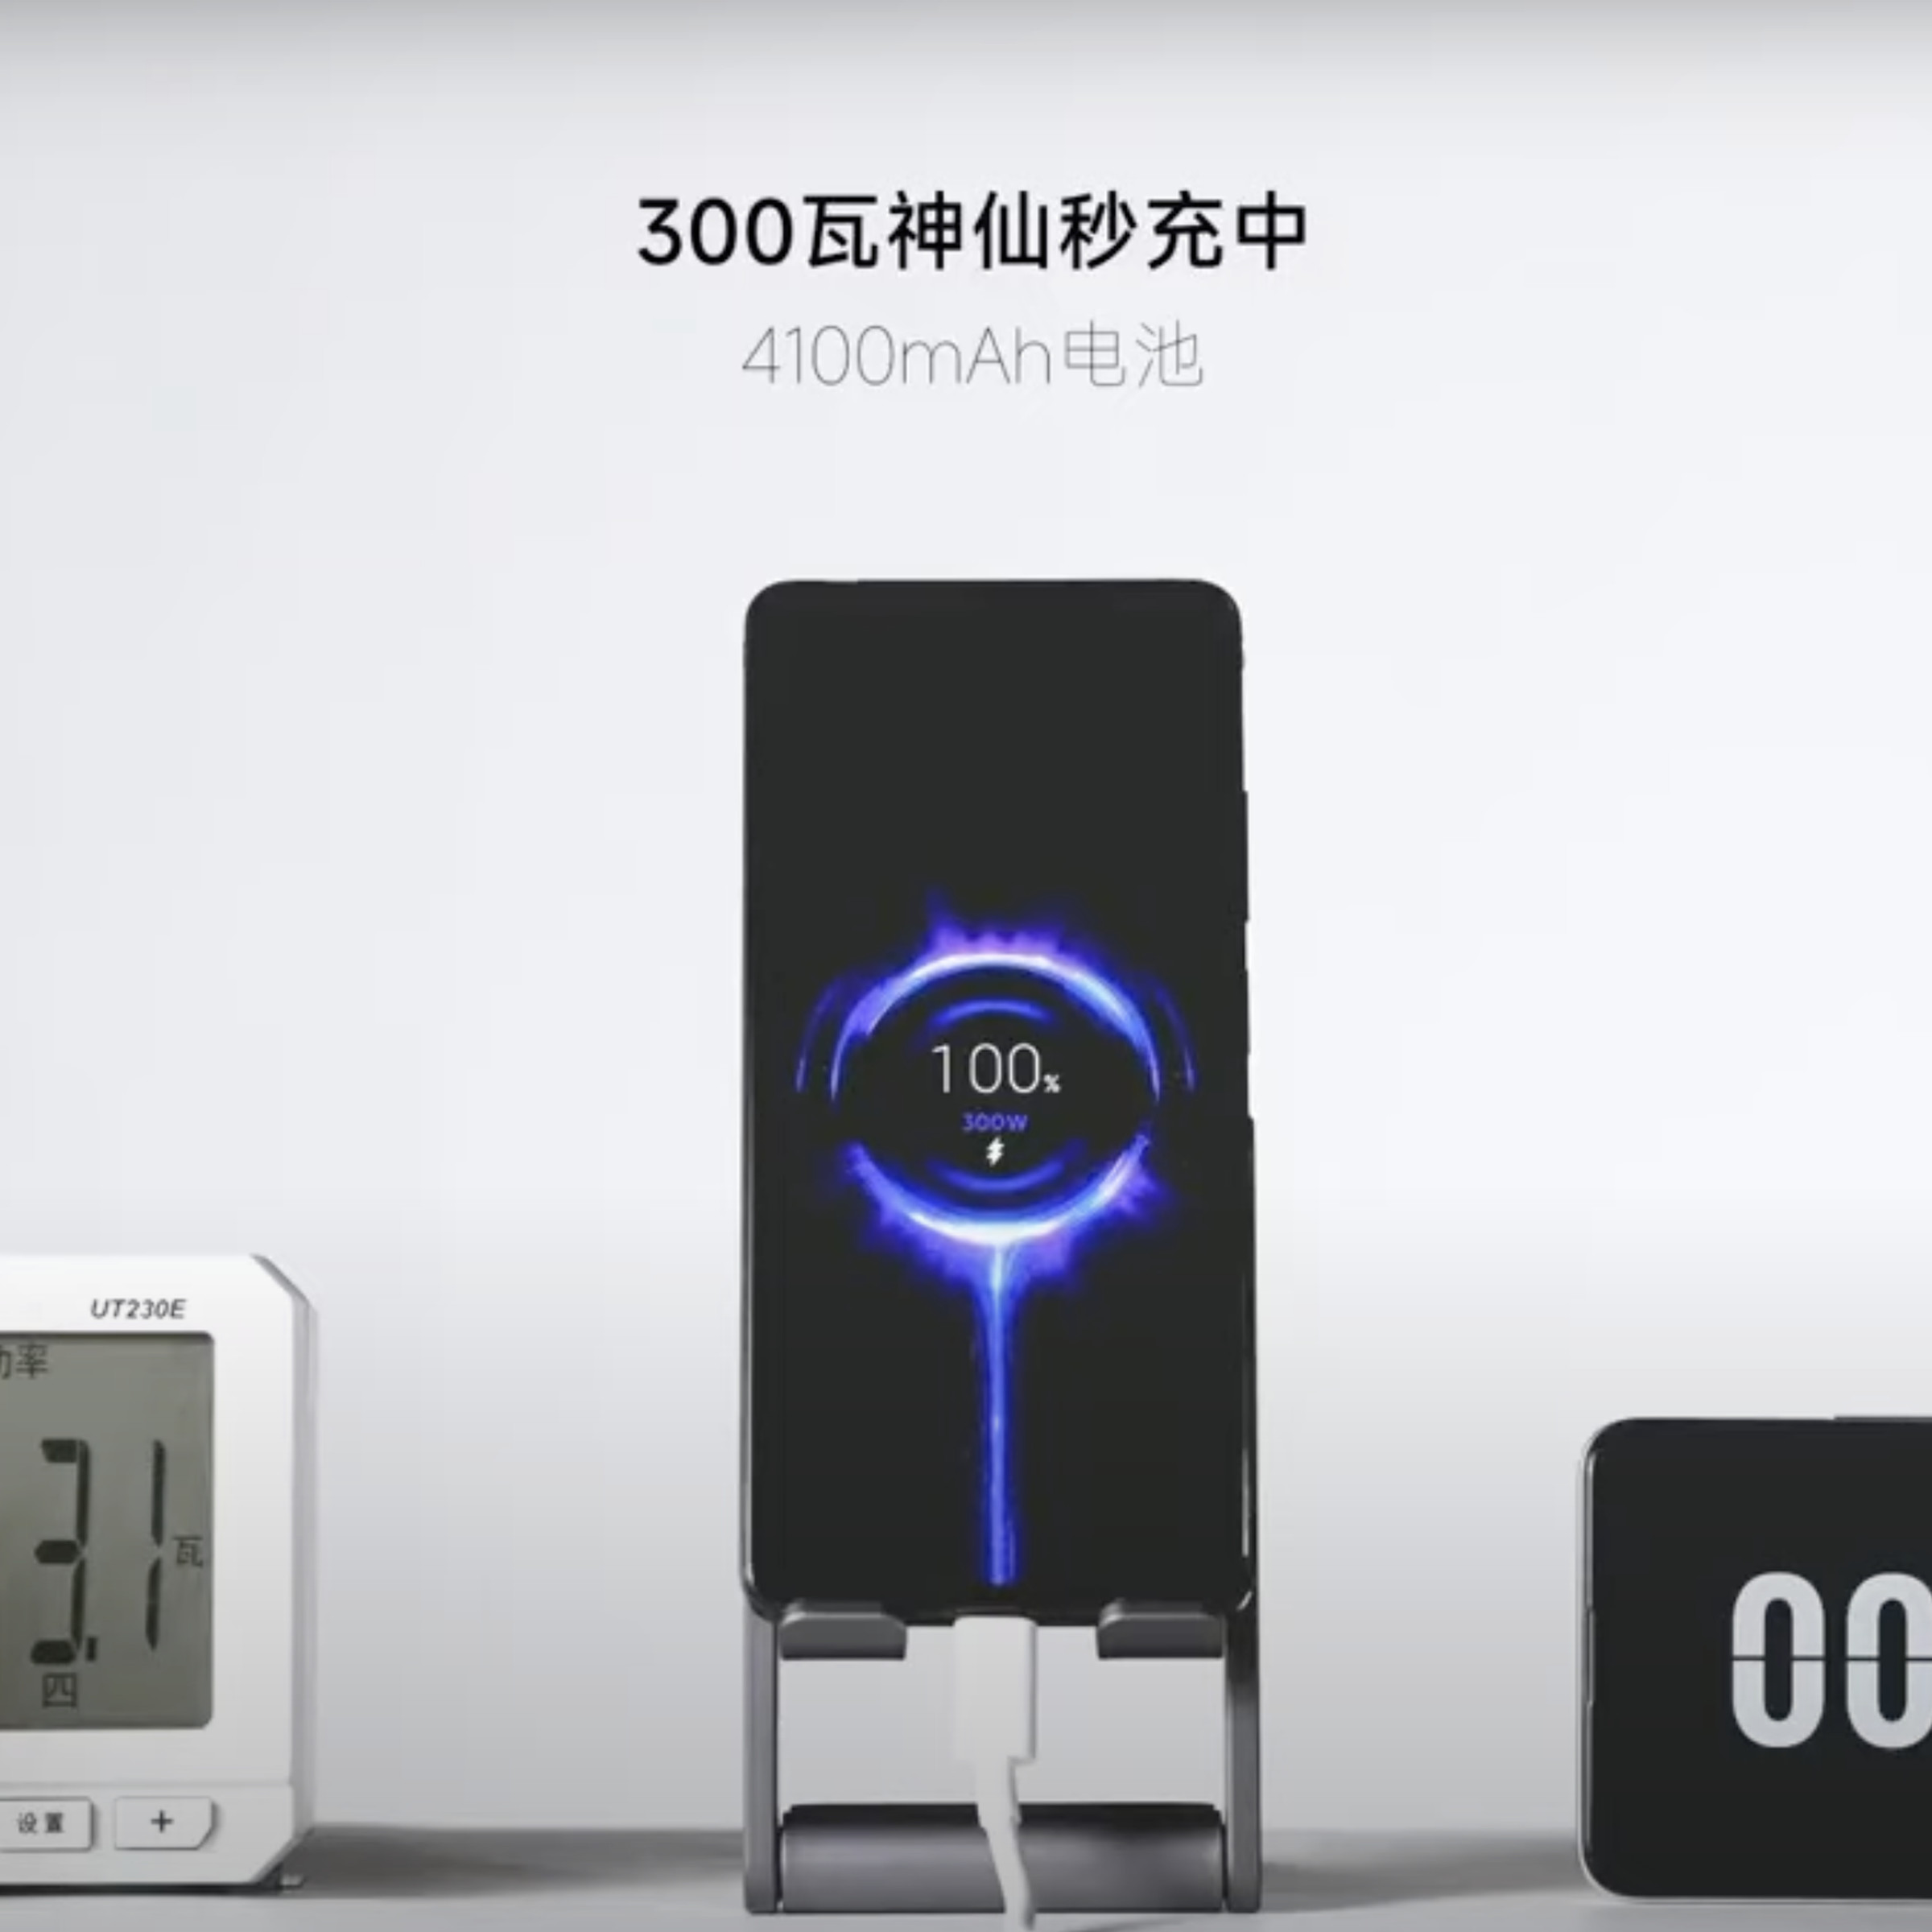 An image showing a Redmi phone charging to 100 percent in five minutes